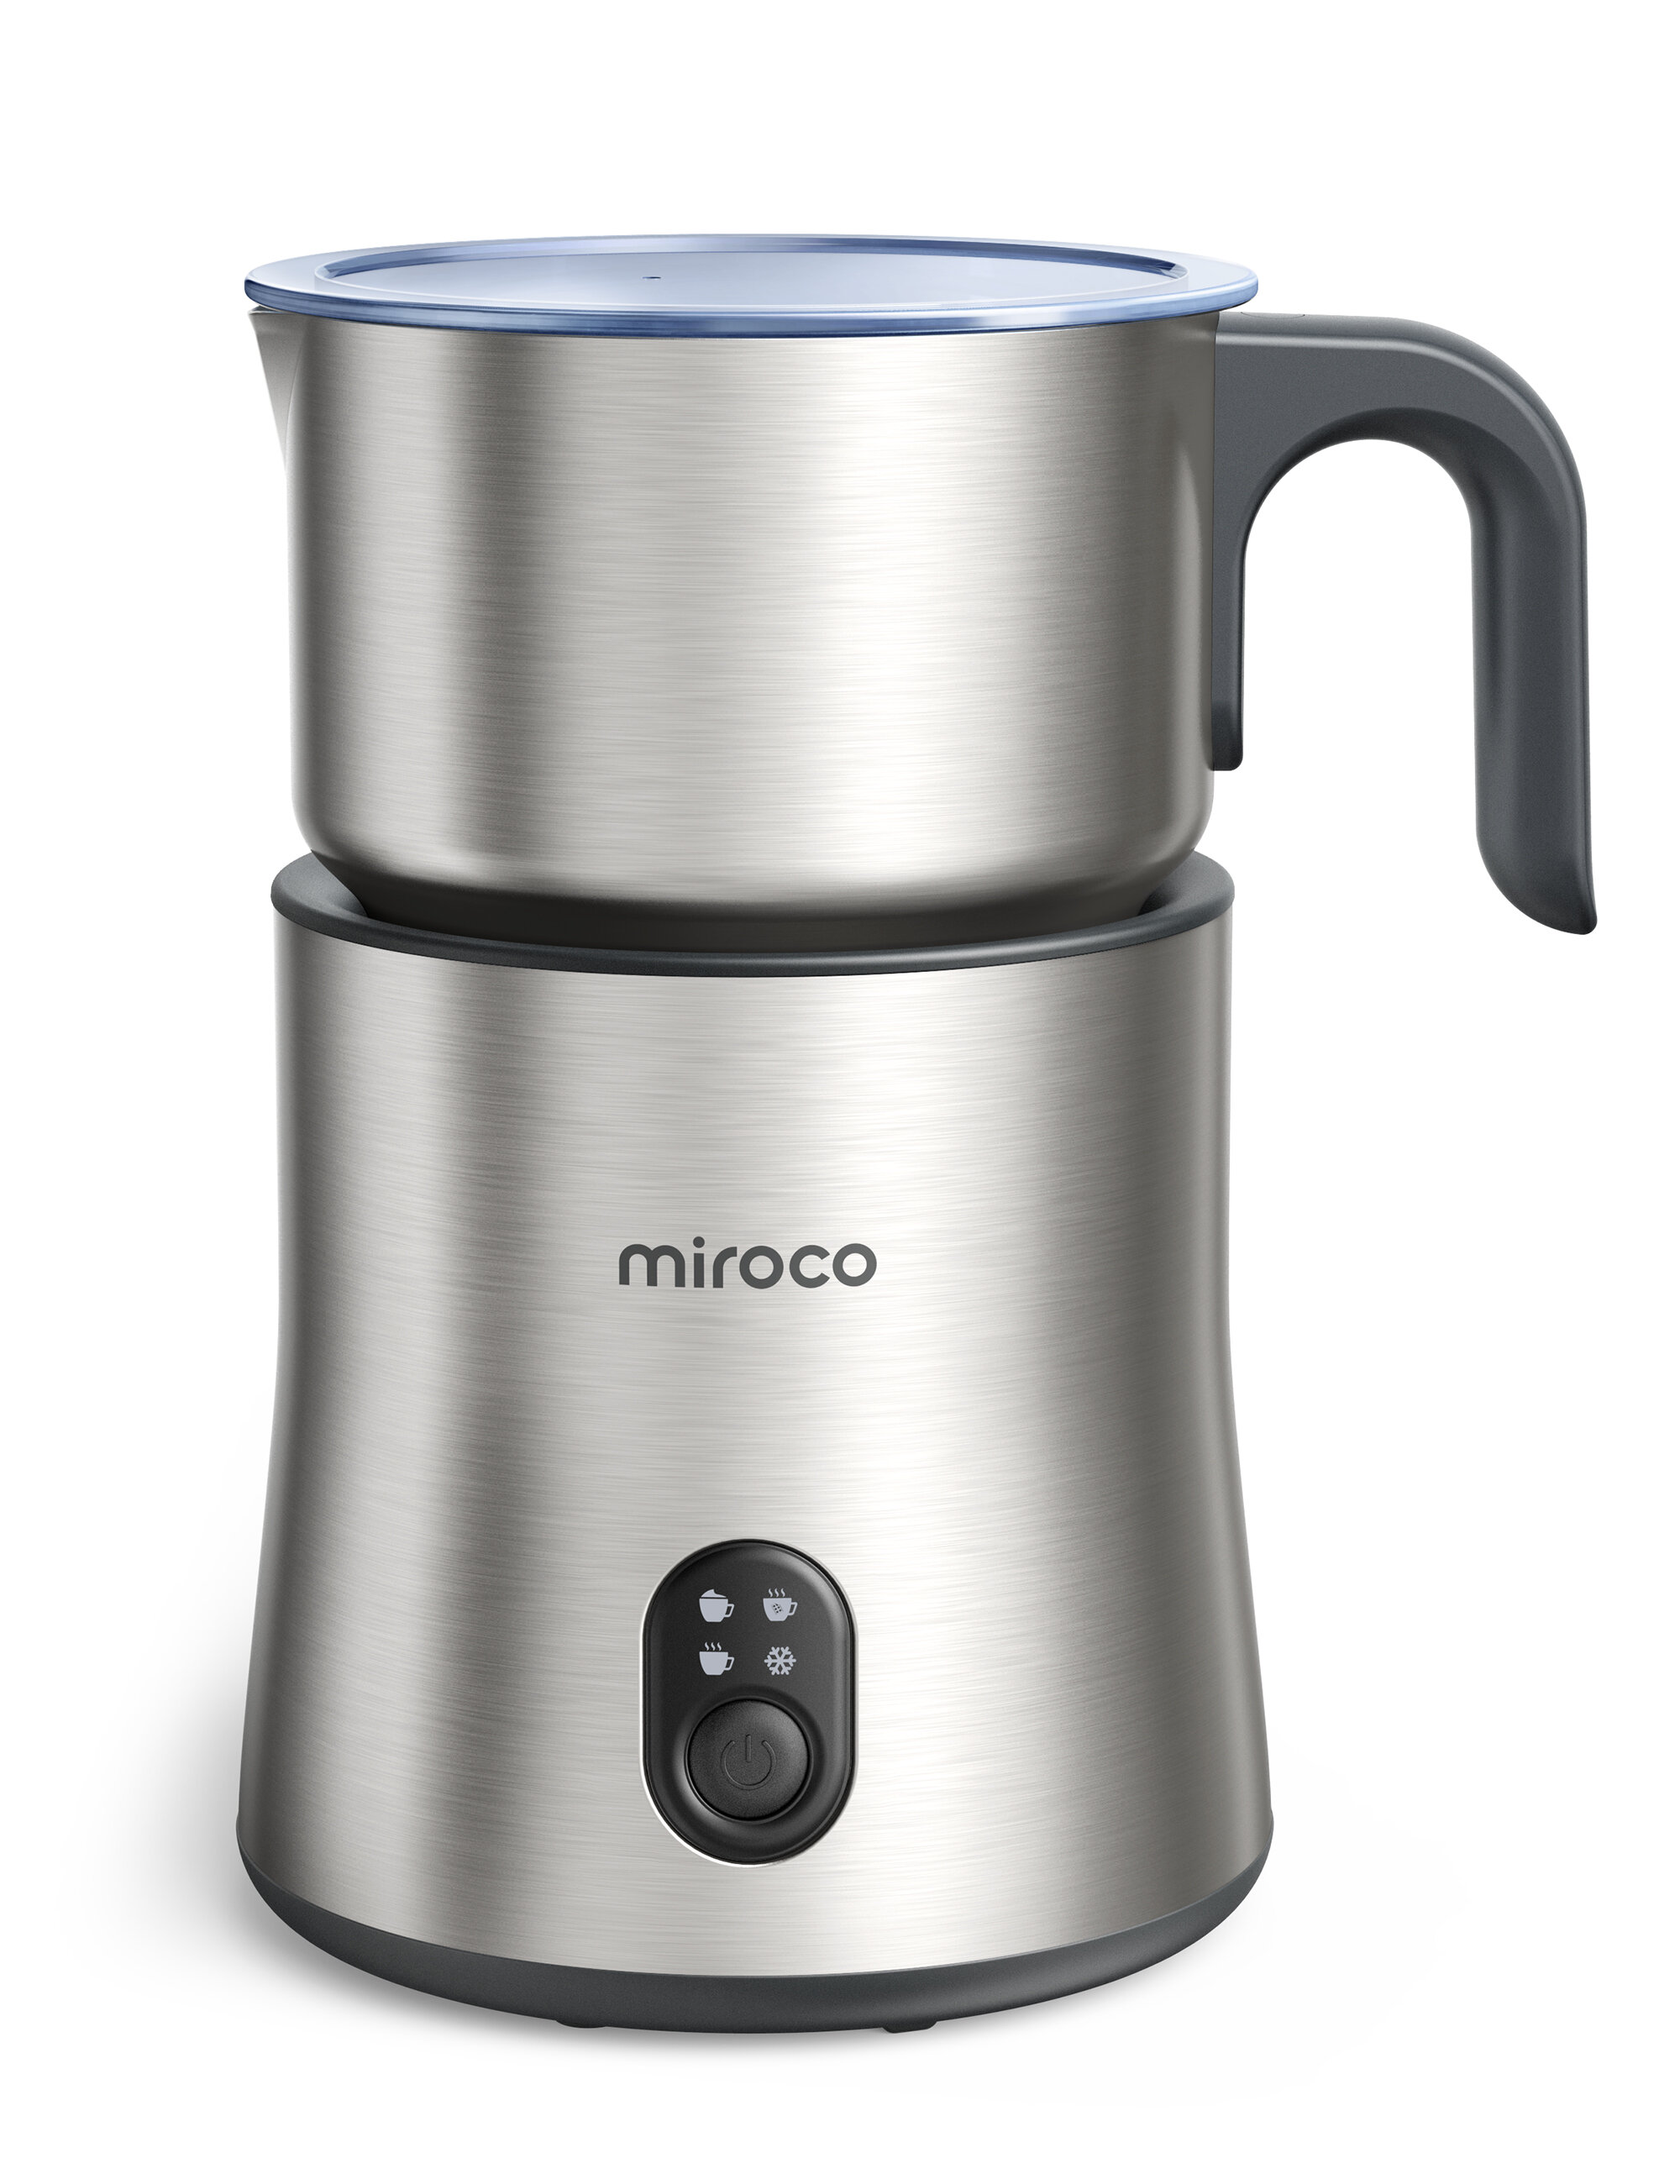 Miroco Milk Frother MI-MF002 Electric Milk Steamer In Box - Milk Frothers, Facebook Marketplace